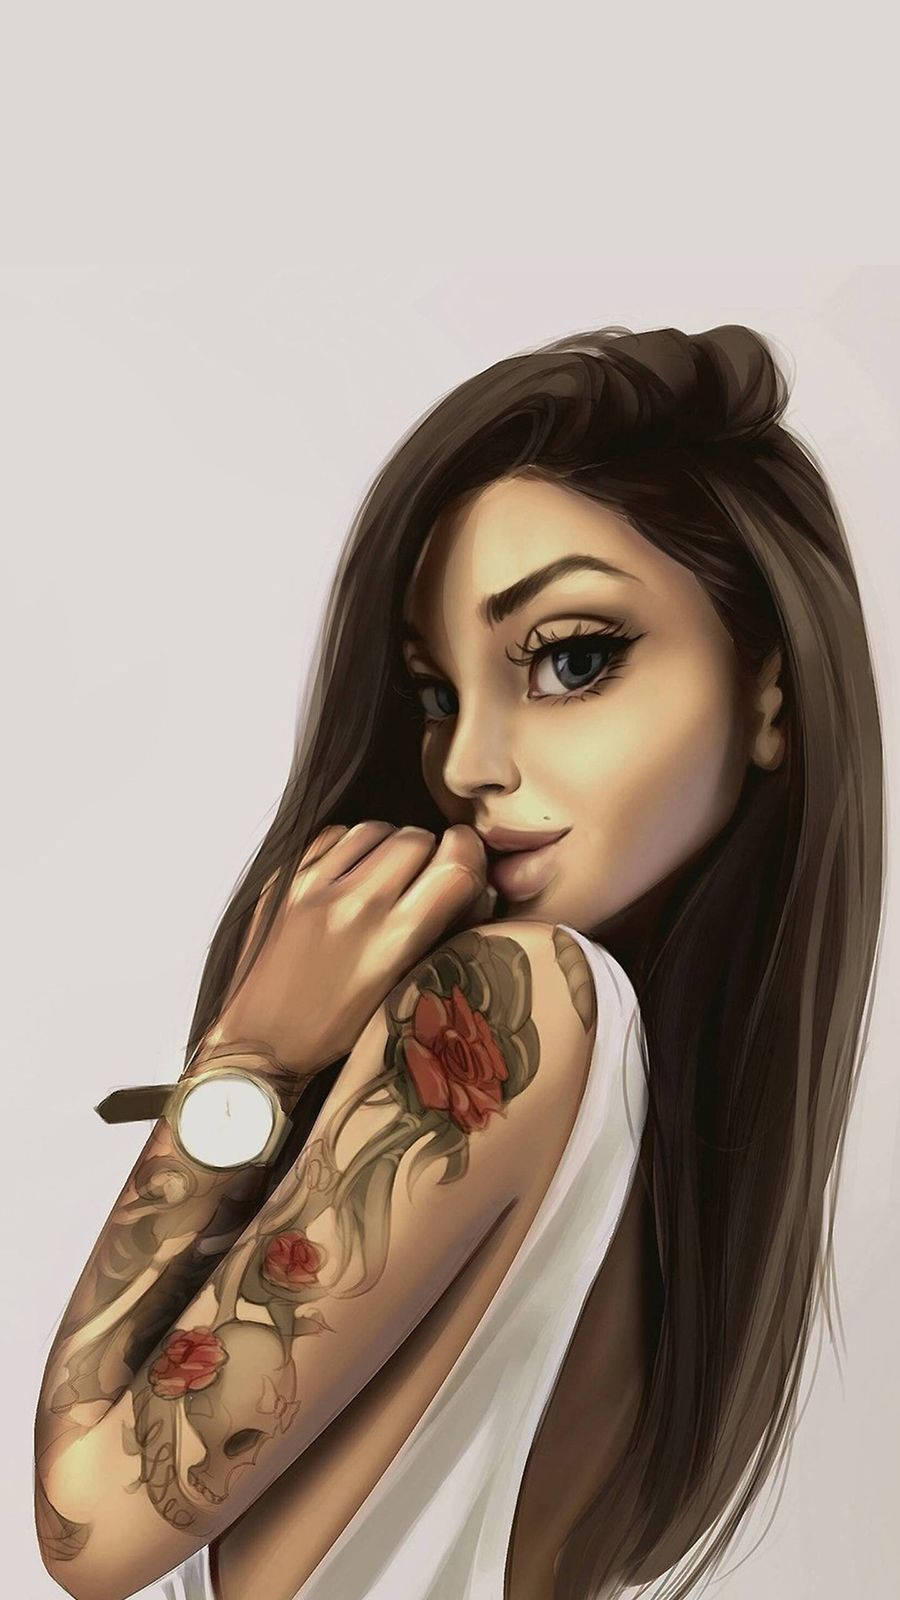 Cool Girl Cartoon With Tattoos Background